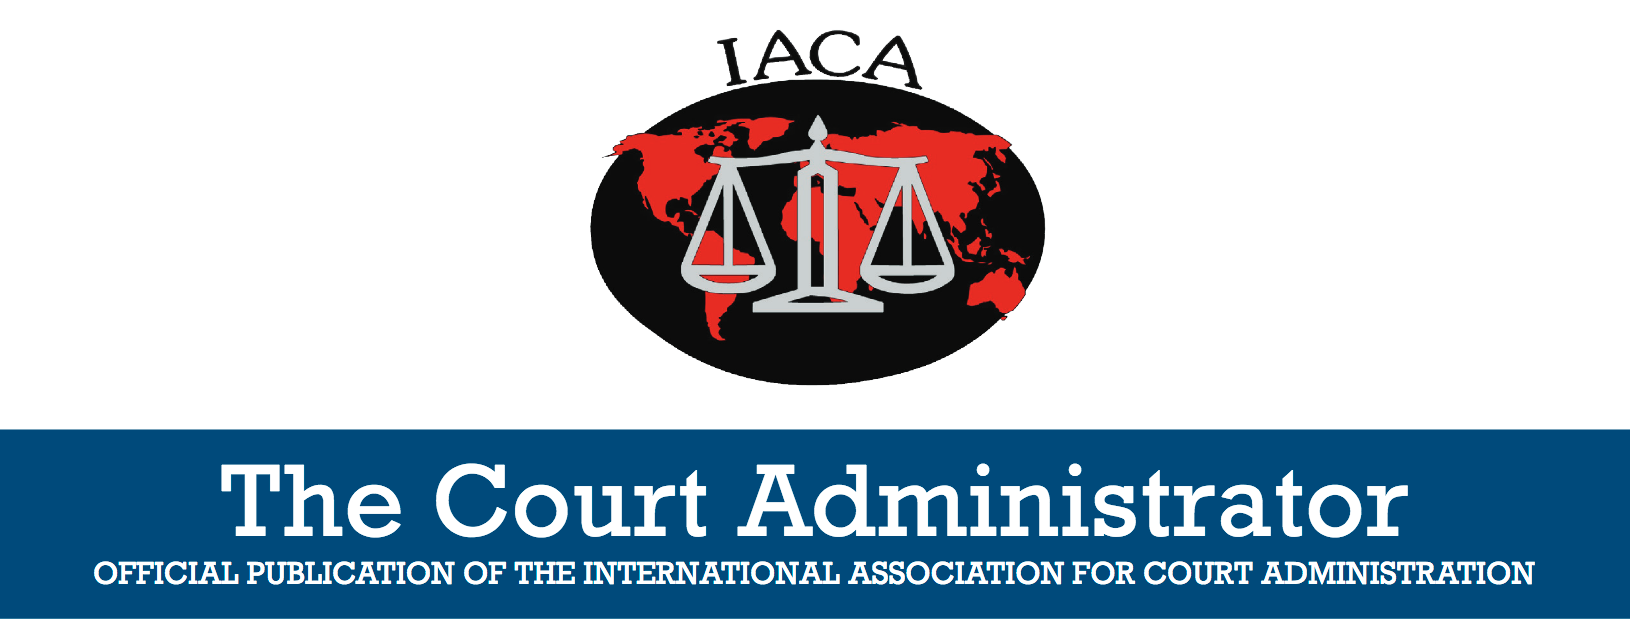 The Court Administrator Newsletter